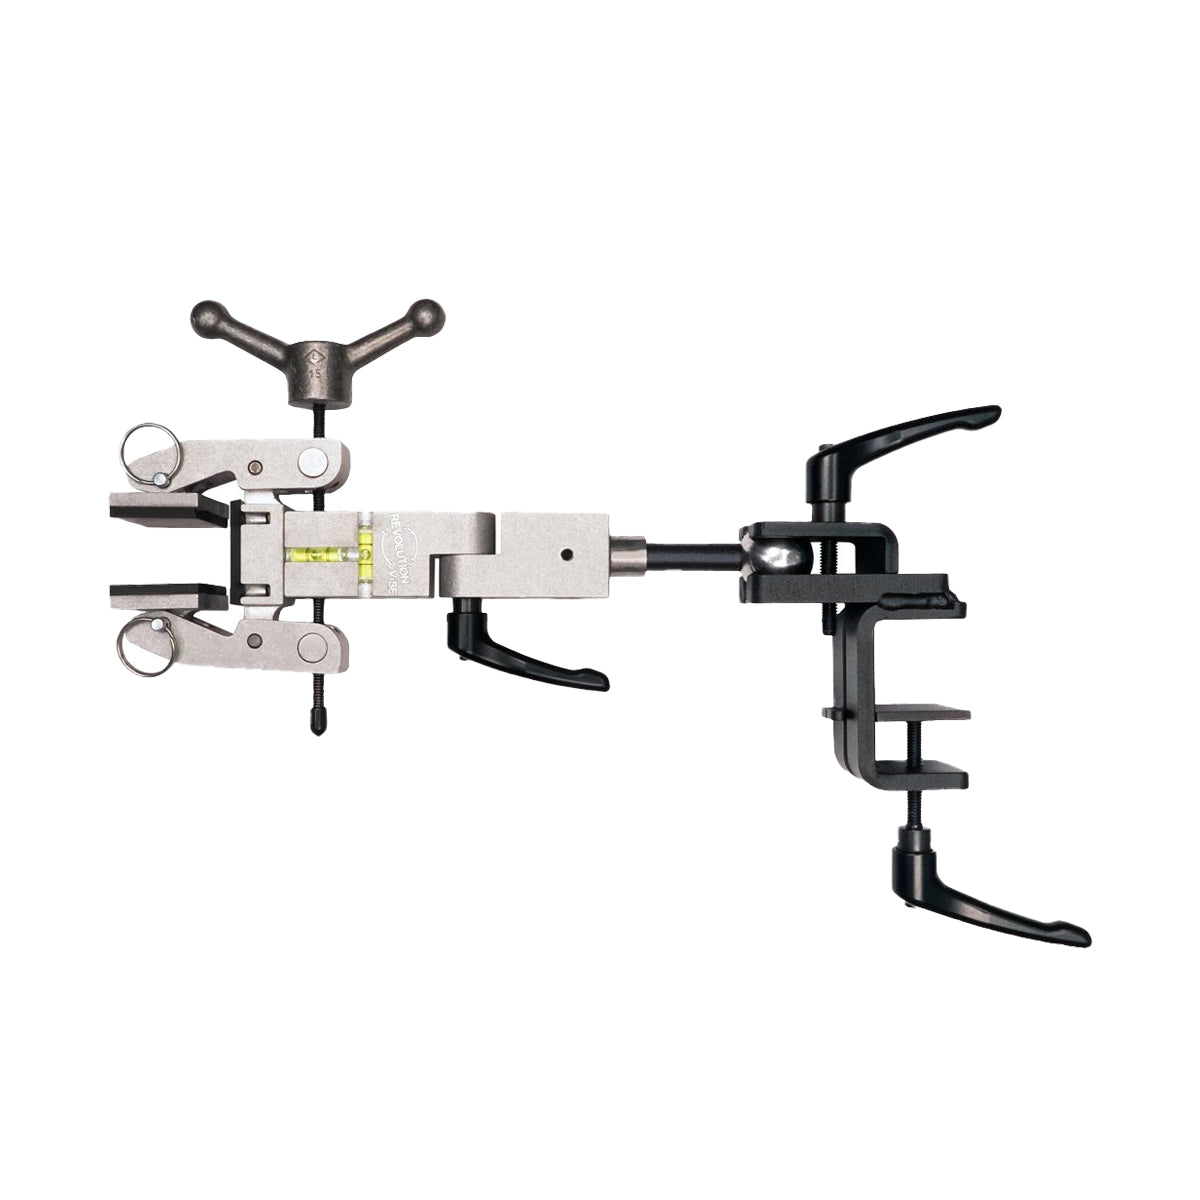 Last Chance Archery Revolution Vise in  by GOHUNT | Last Chance Archery - GOHUNT Shop